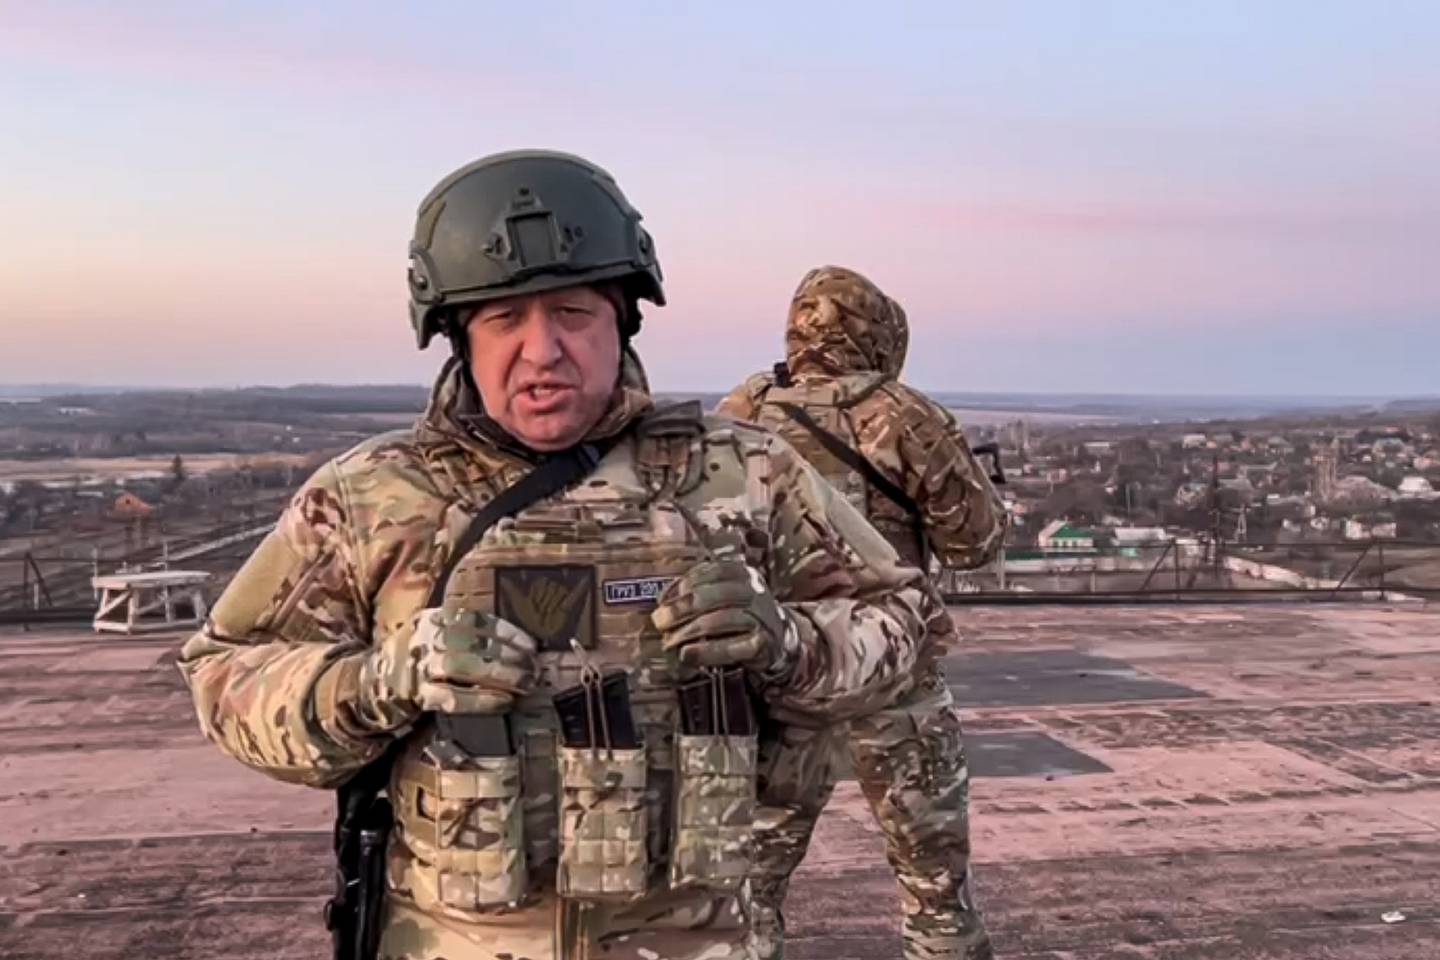 Wagner commander Yevgeny Prigozhin announced that his soldiers 